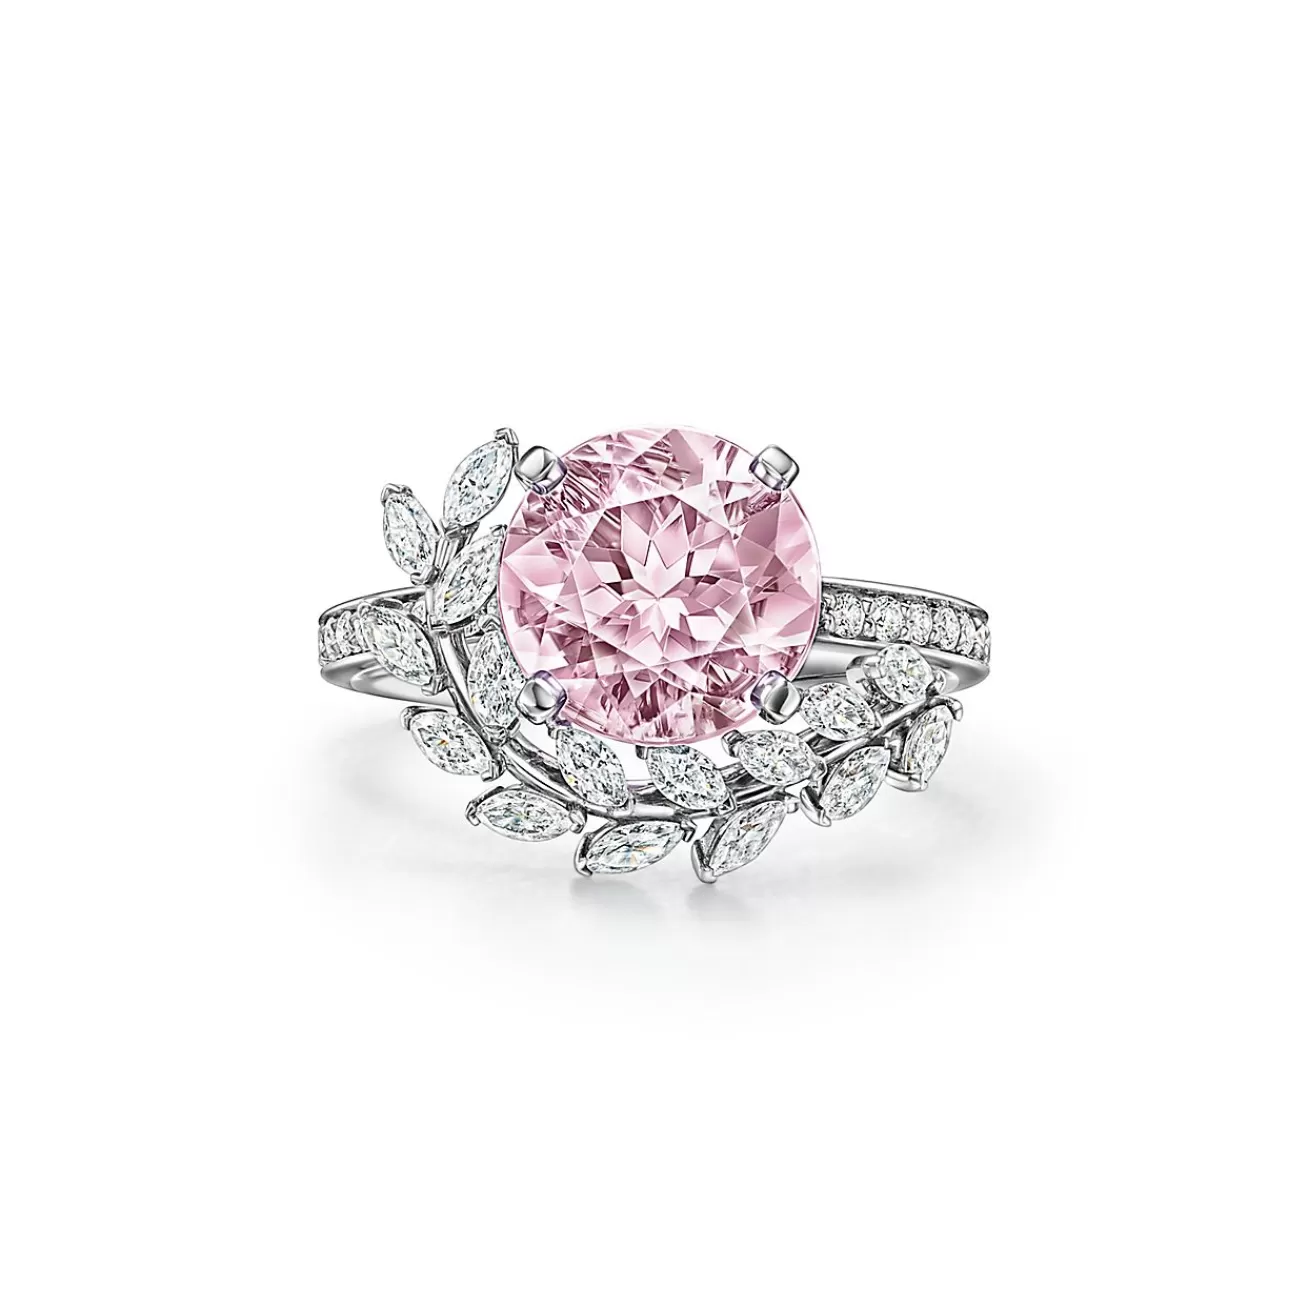 Tiffany & Co. Tiffany Victoria® Vine Ring in Platinum with a Morganite and Diamonds | ^ Rings | Platinum Jewelry